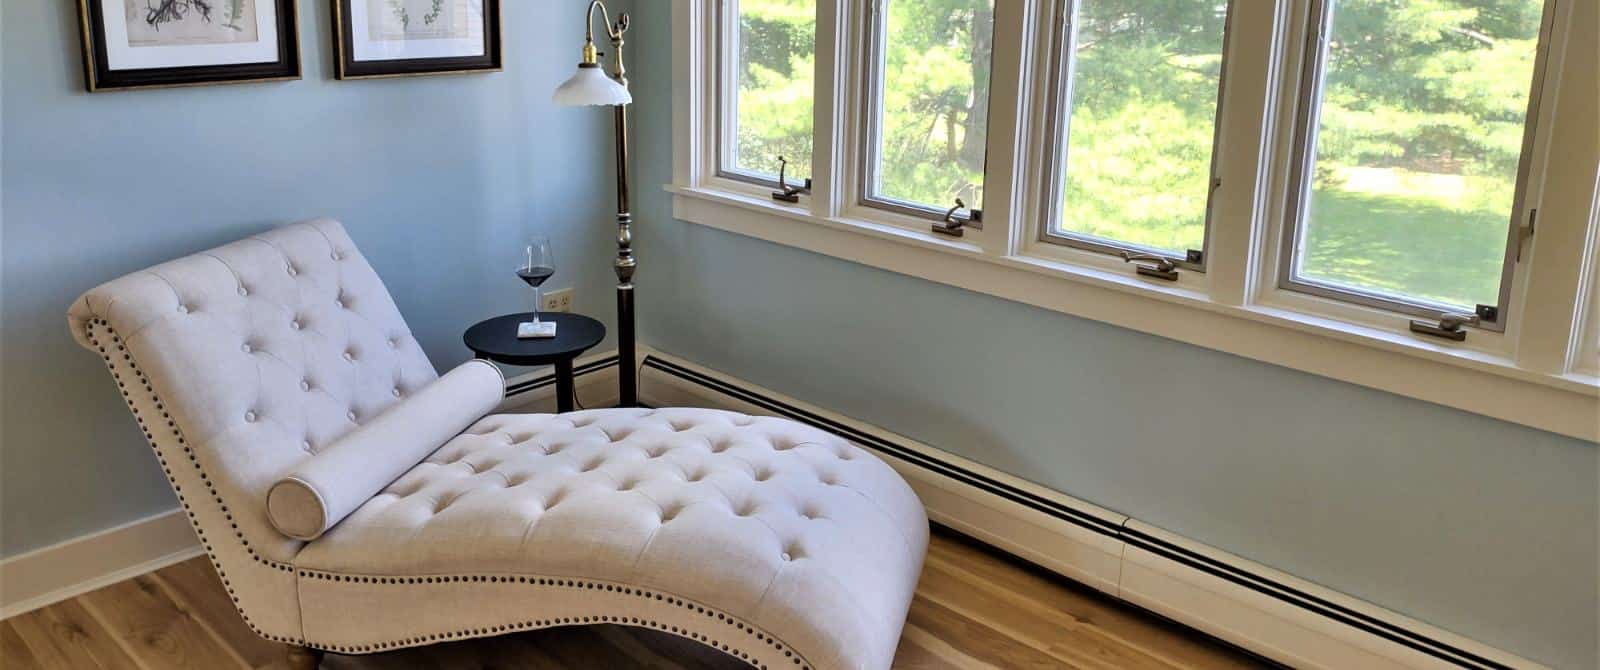 Bedroom with light blue walls, white trim, hardwood flooring, and upholstered chaise